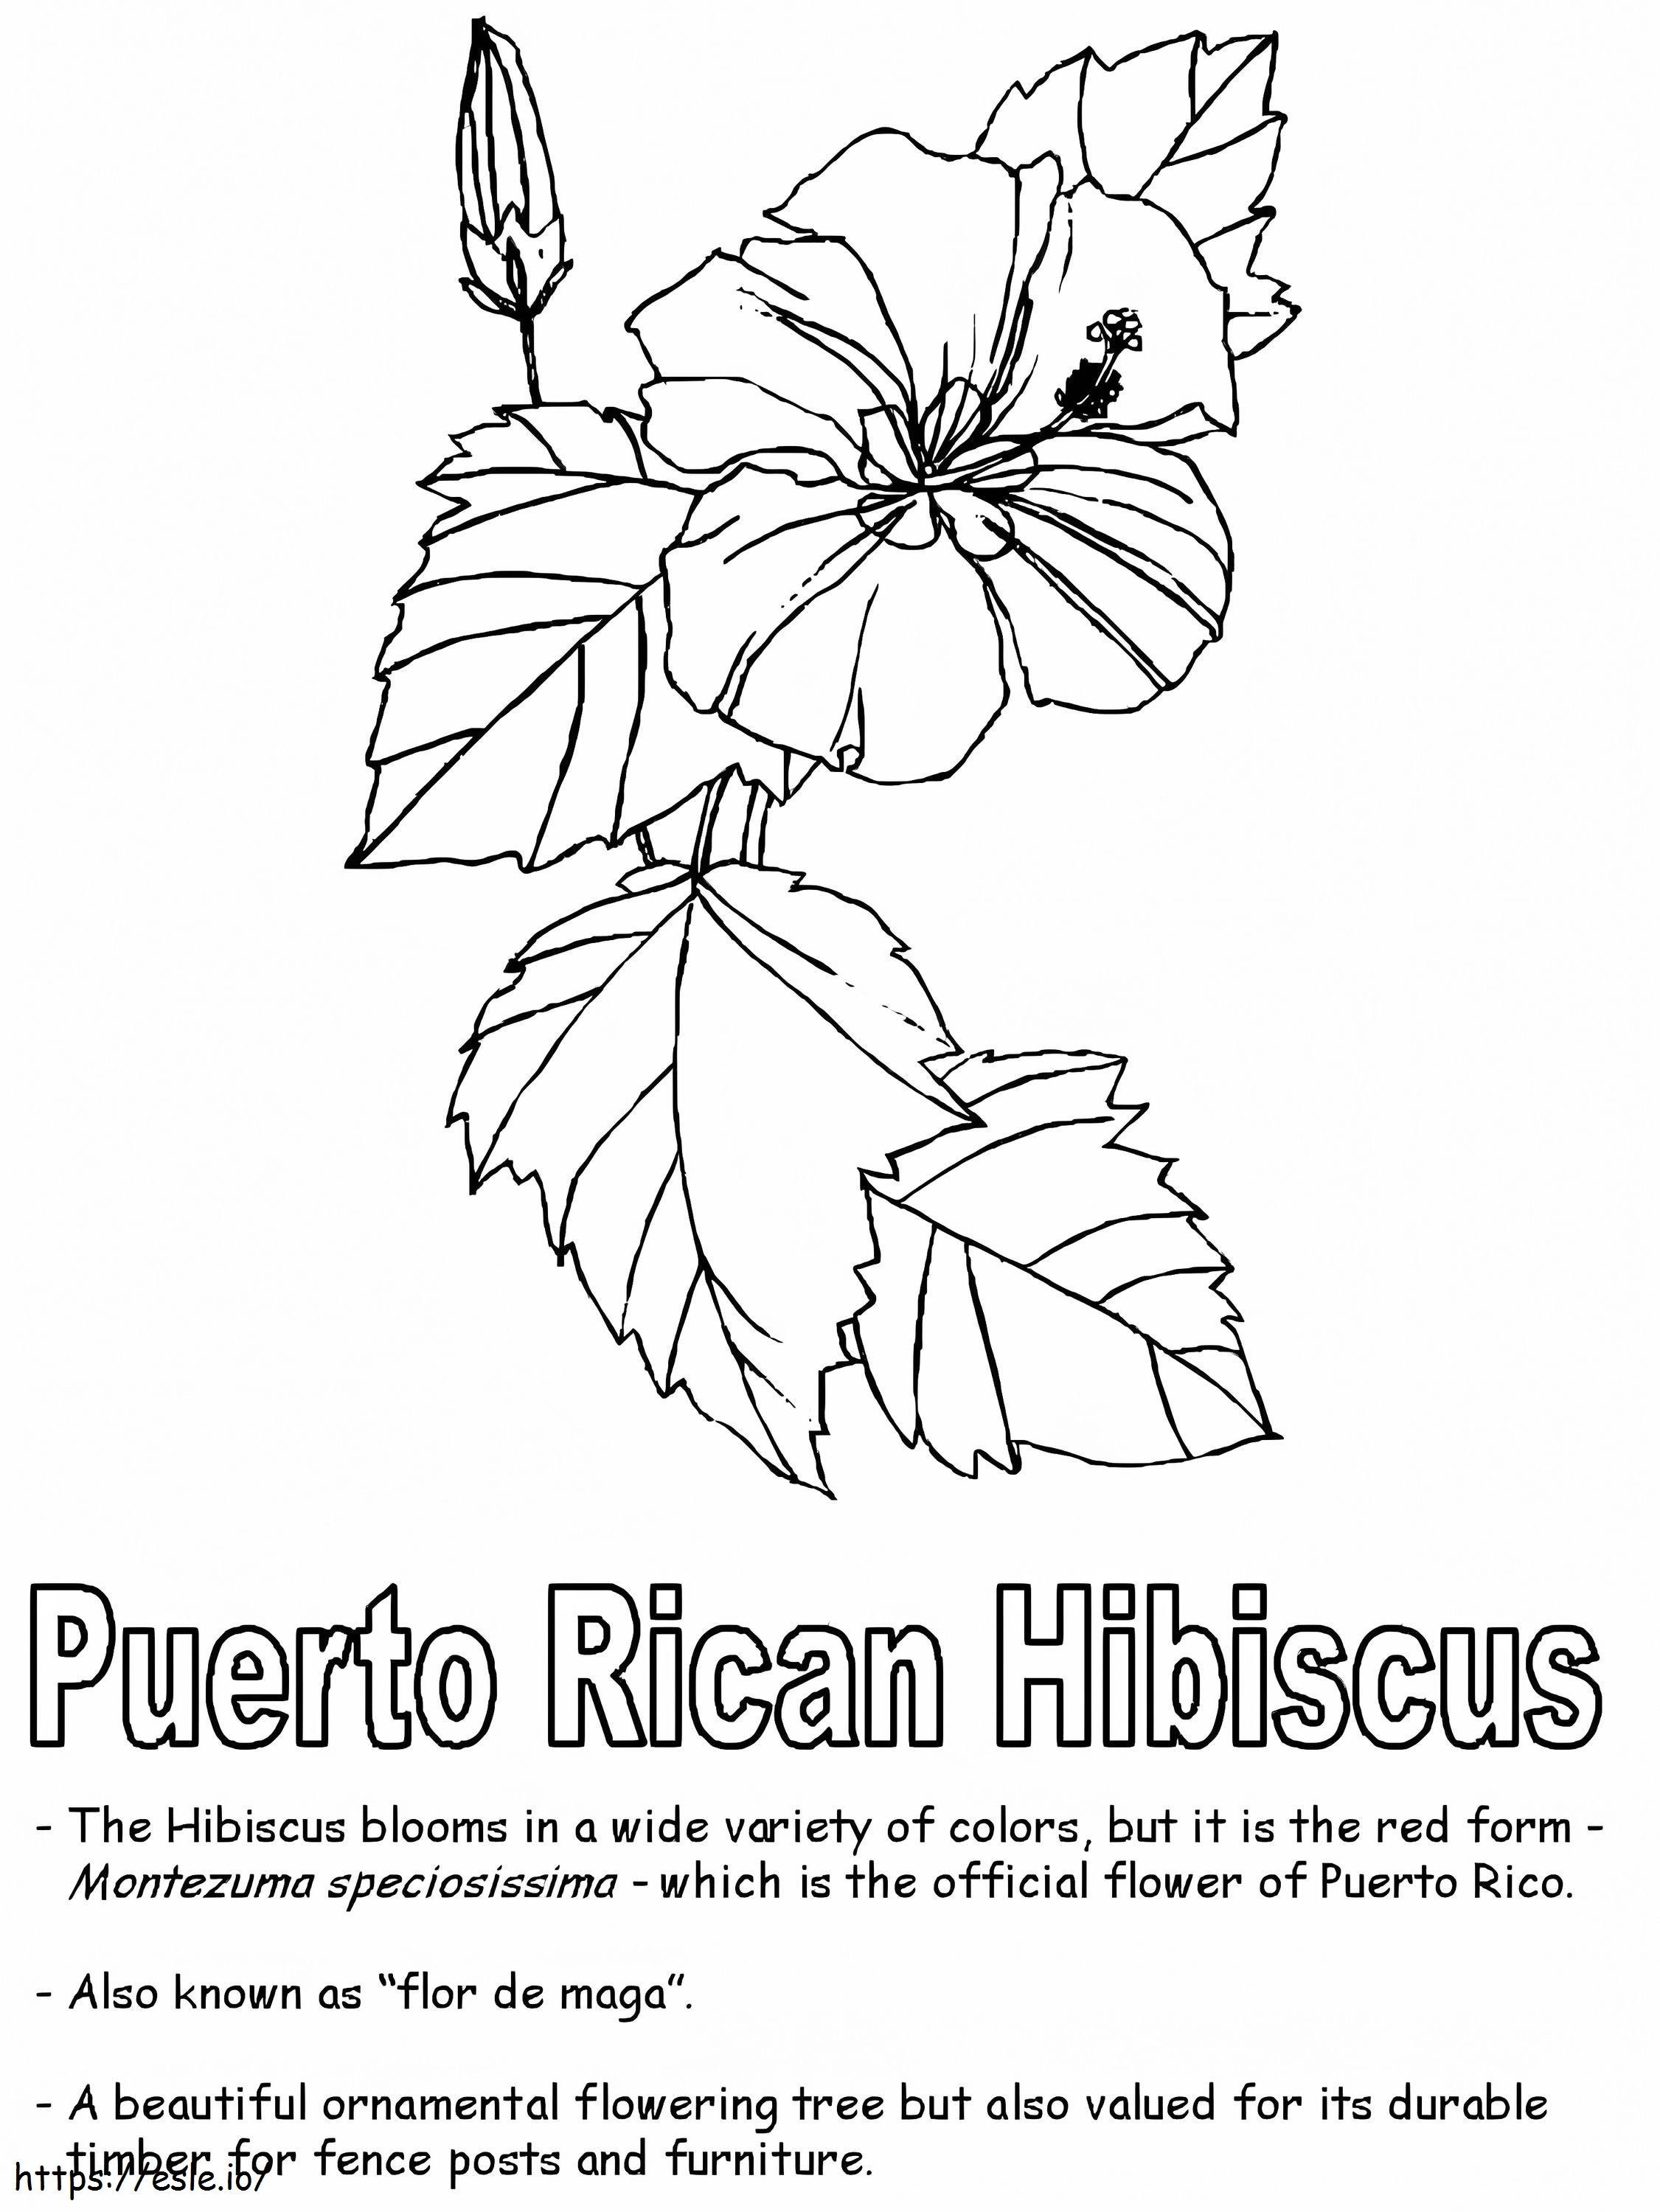 Puerto Rican Hibiscus coloring page